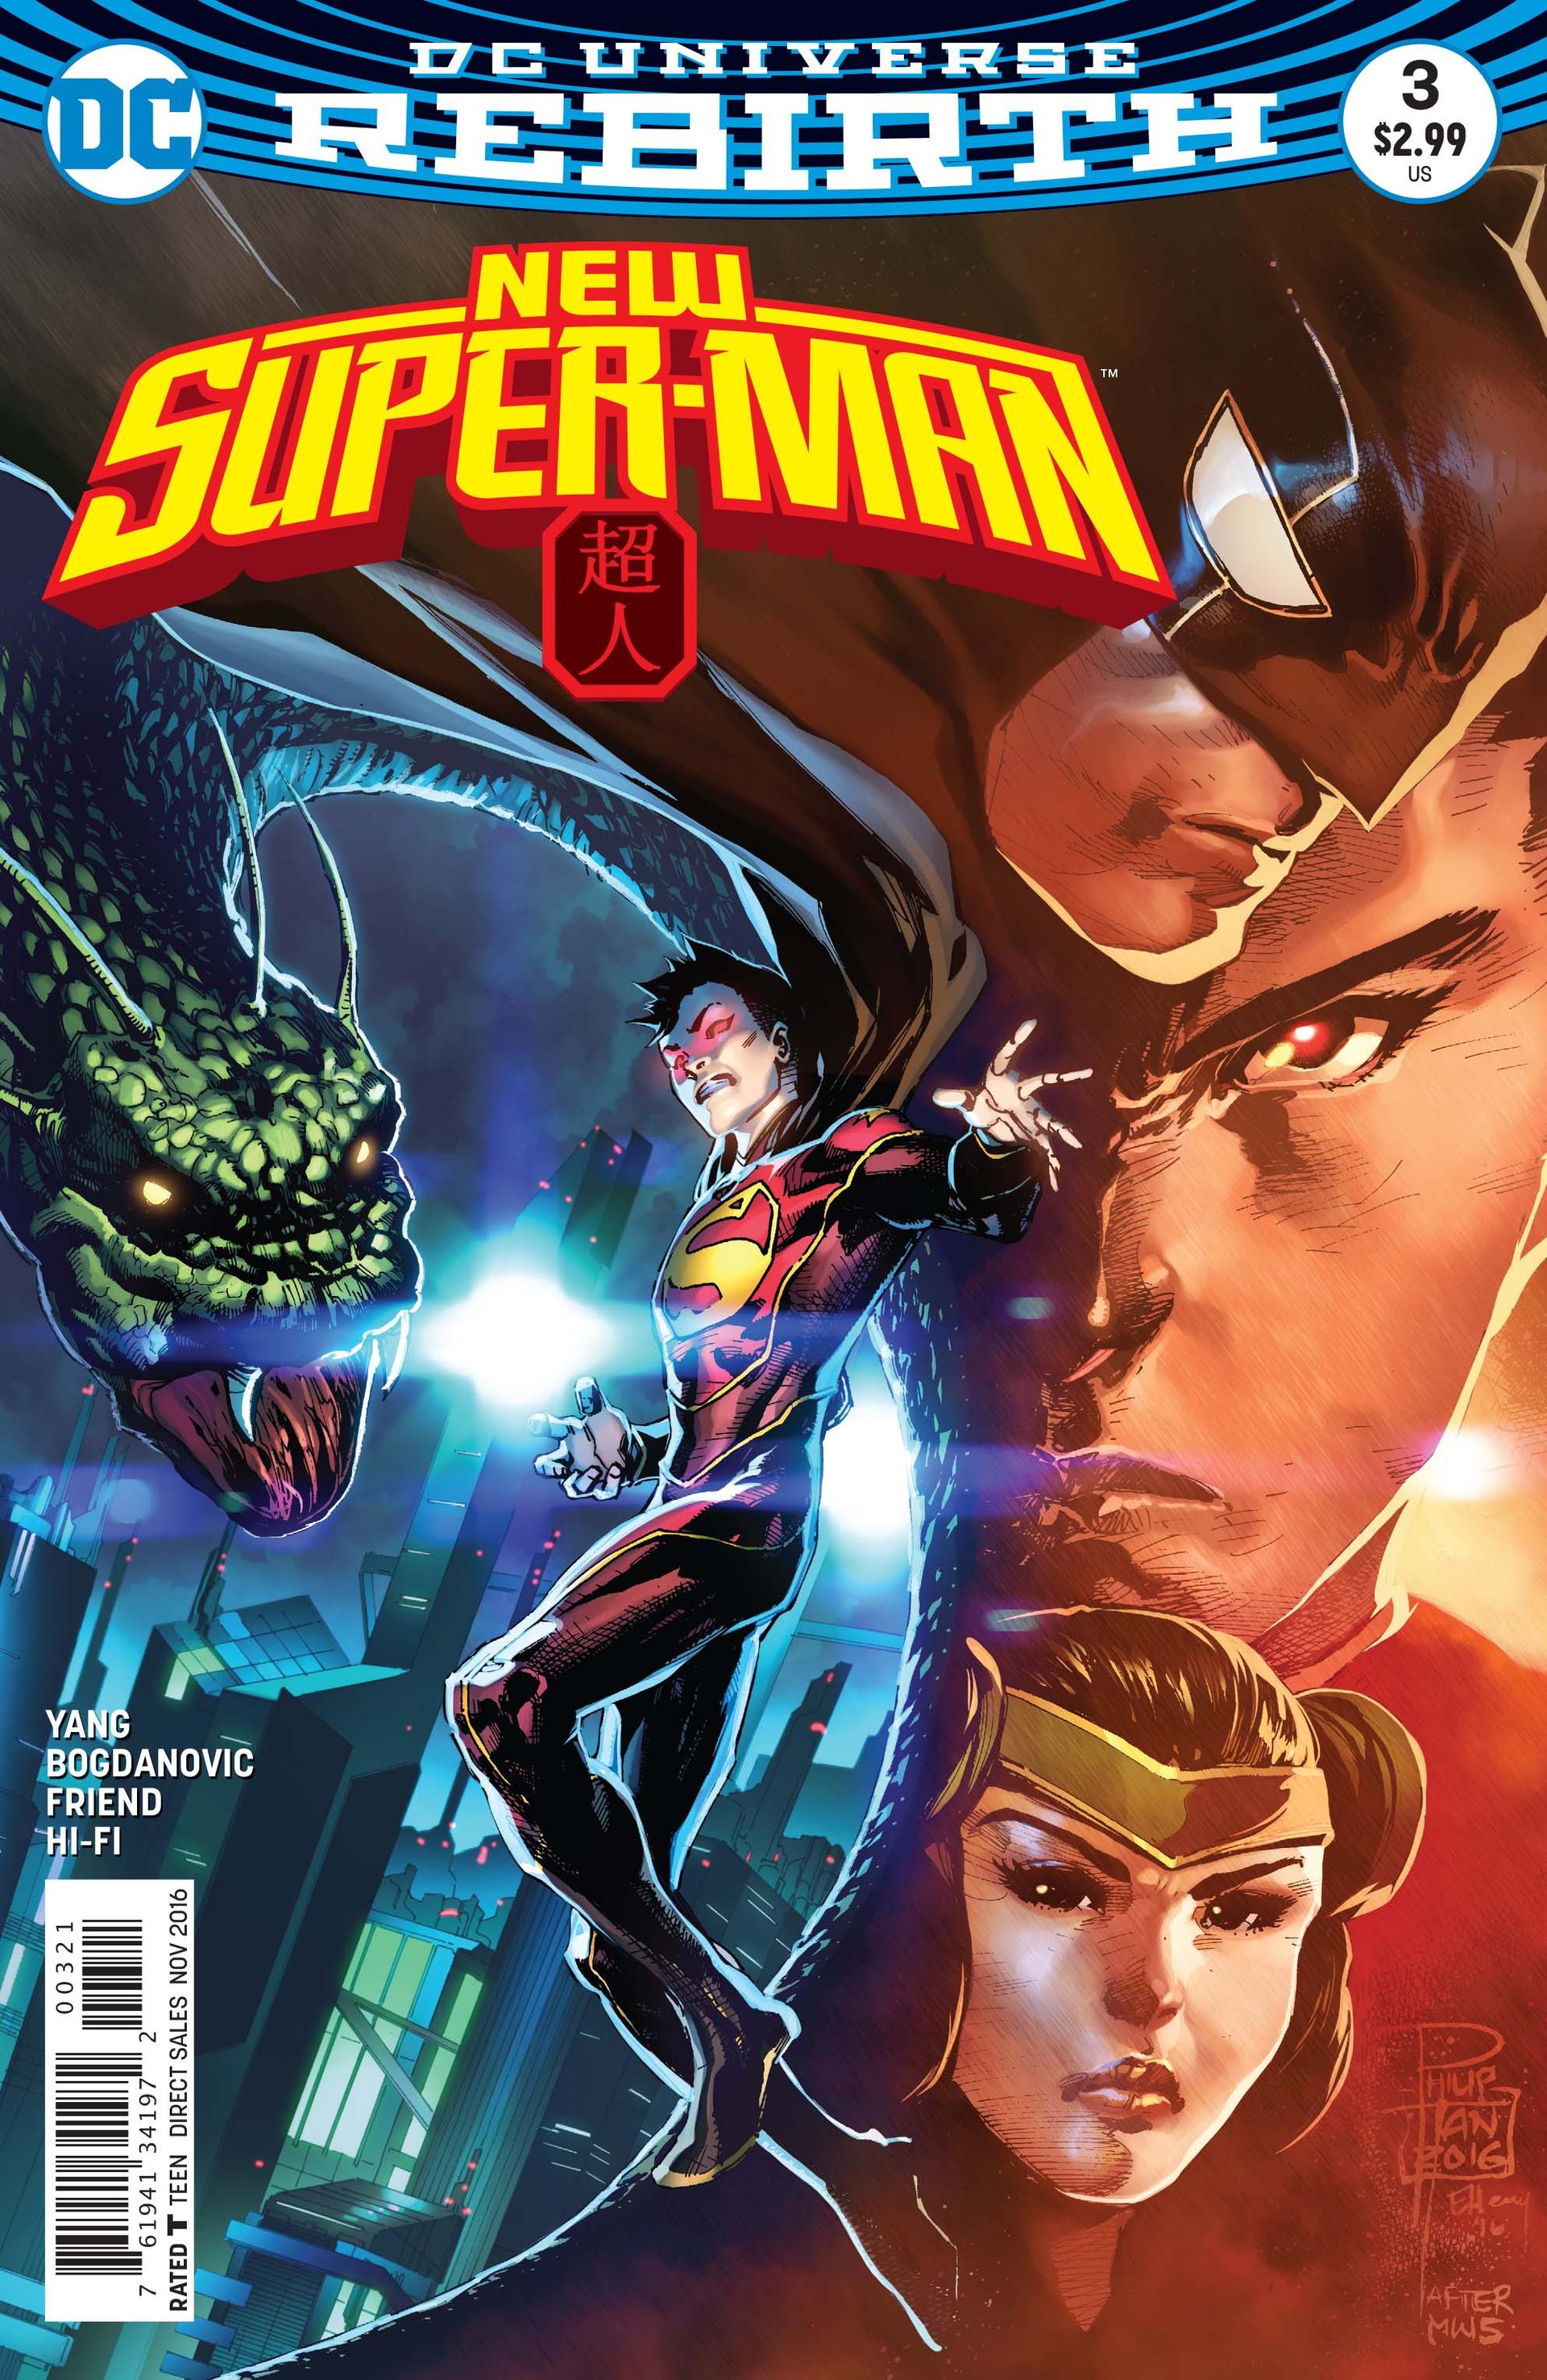 This is the cover image of the New Super-Man comic by DC Comics and writer Gene Luen Yang.